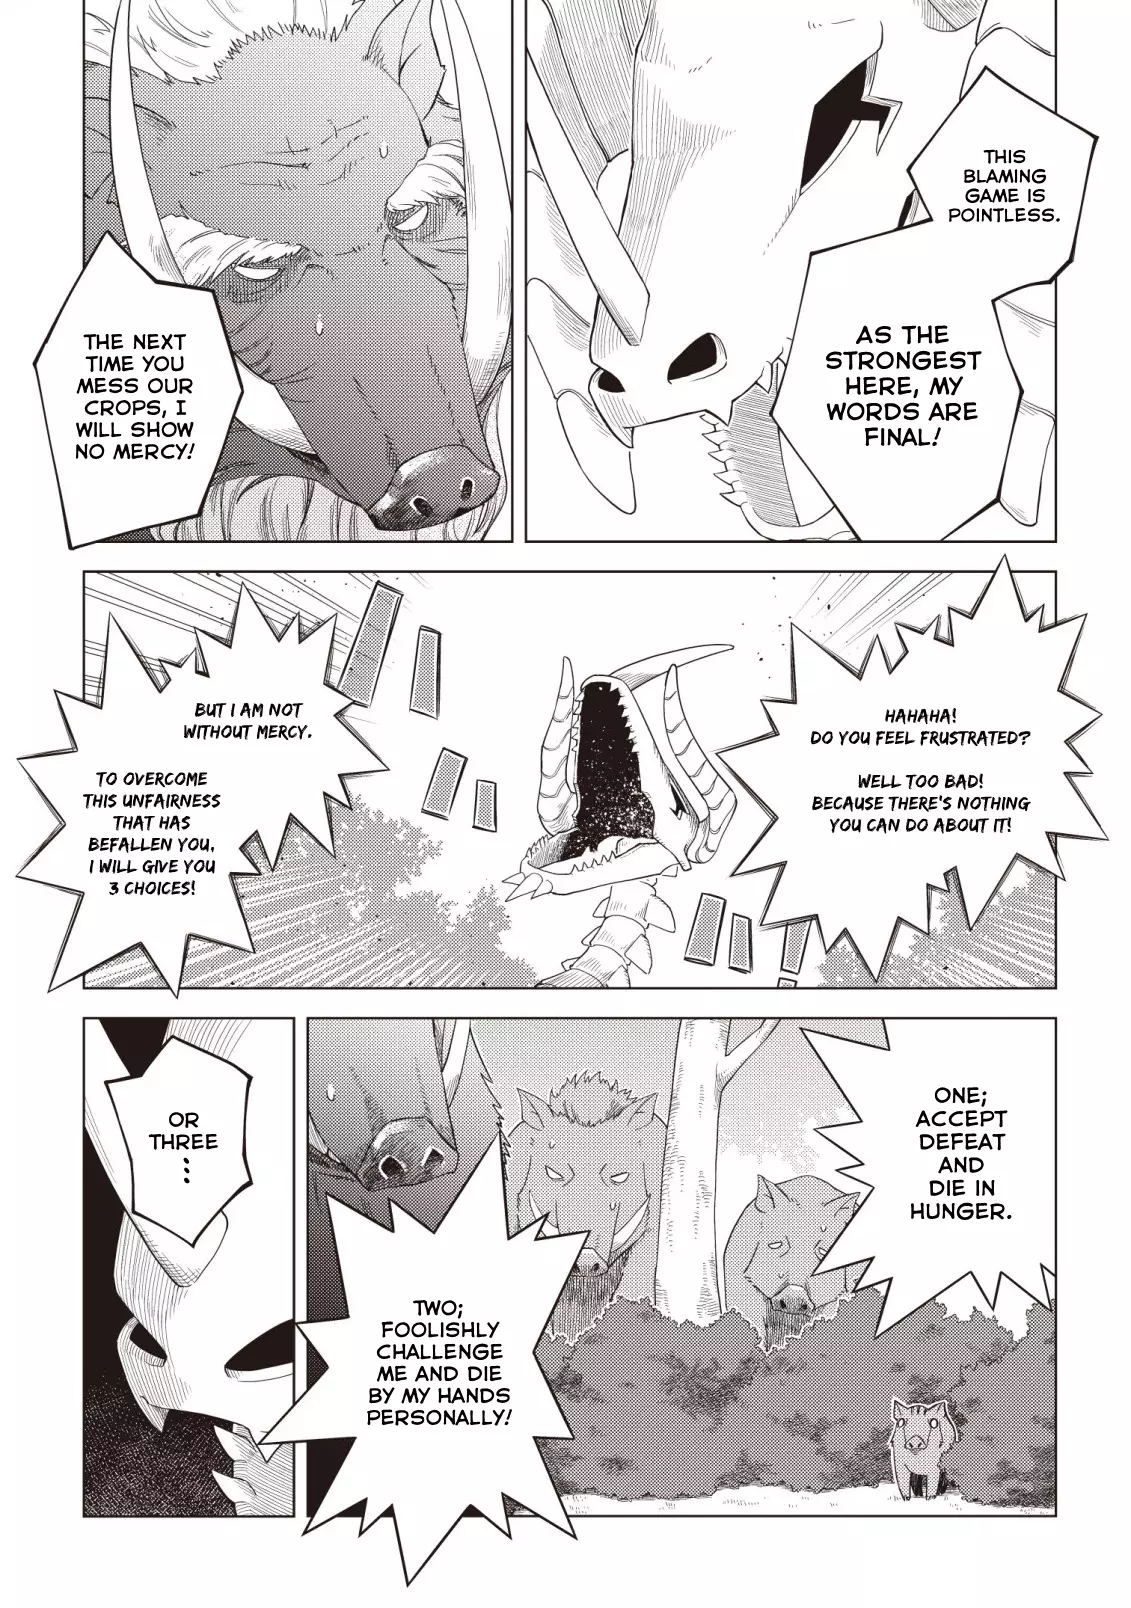 The Dark Dragon King, Will Live A Slow Life - 4 page 19-7150f023